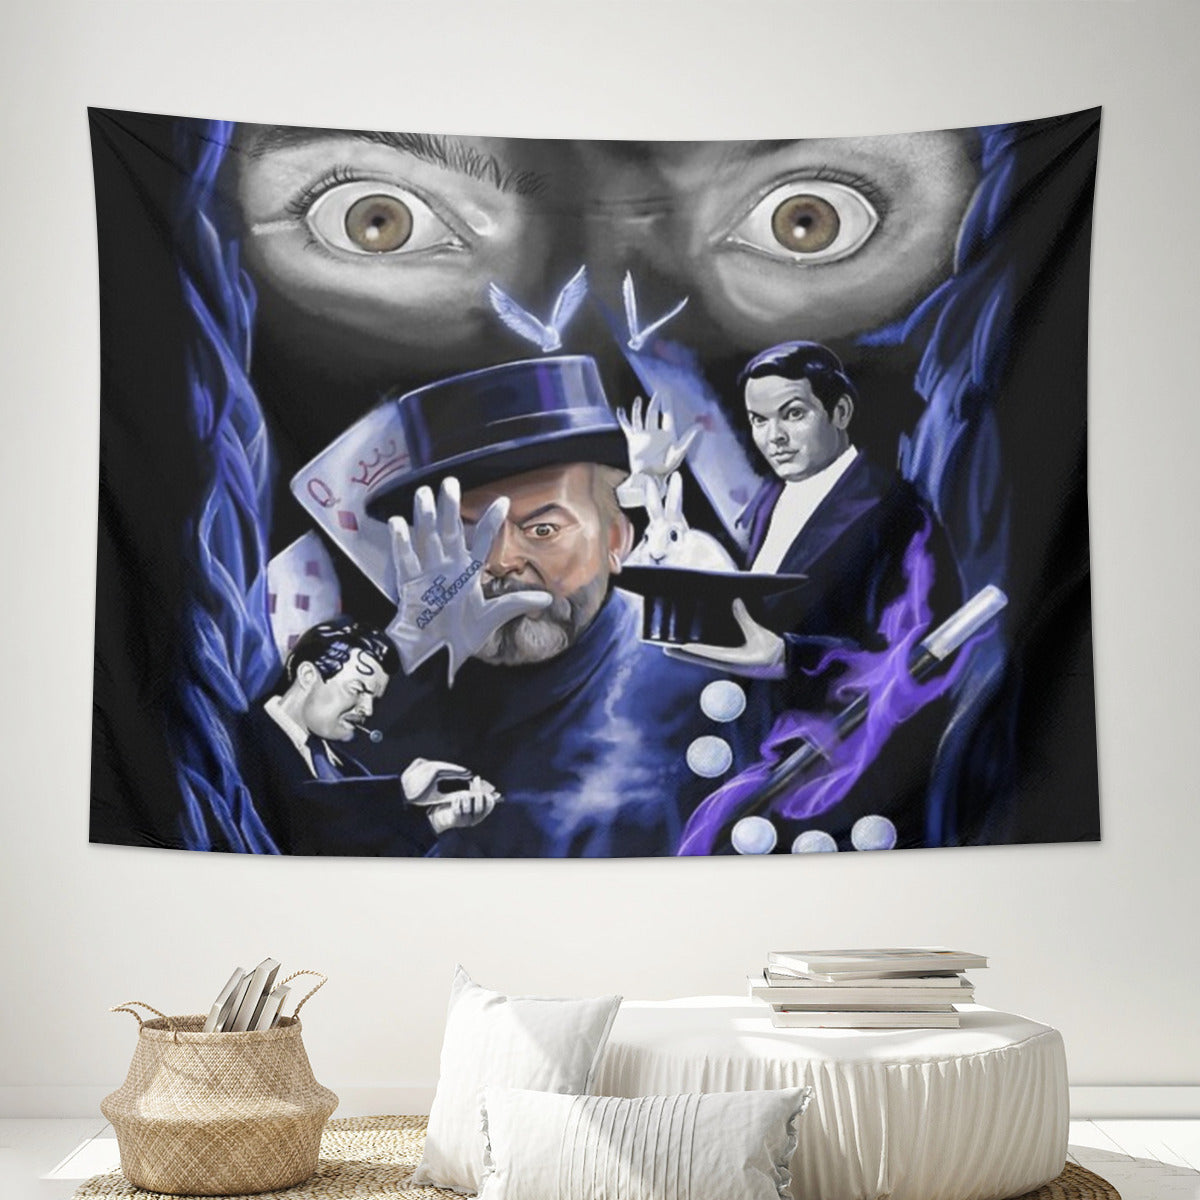 Orson Welles Illusionist Tapestry